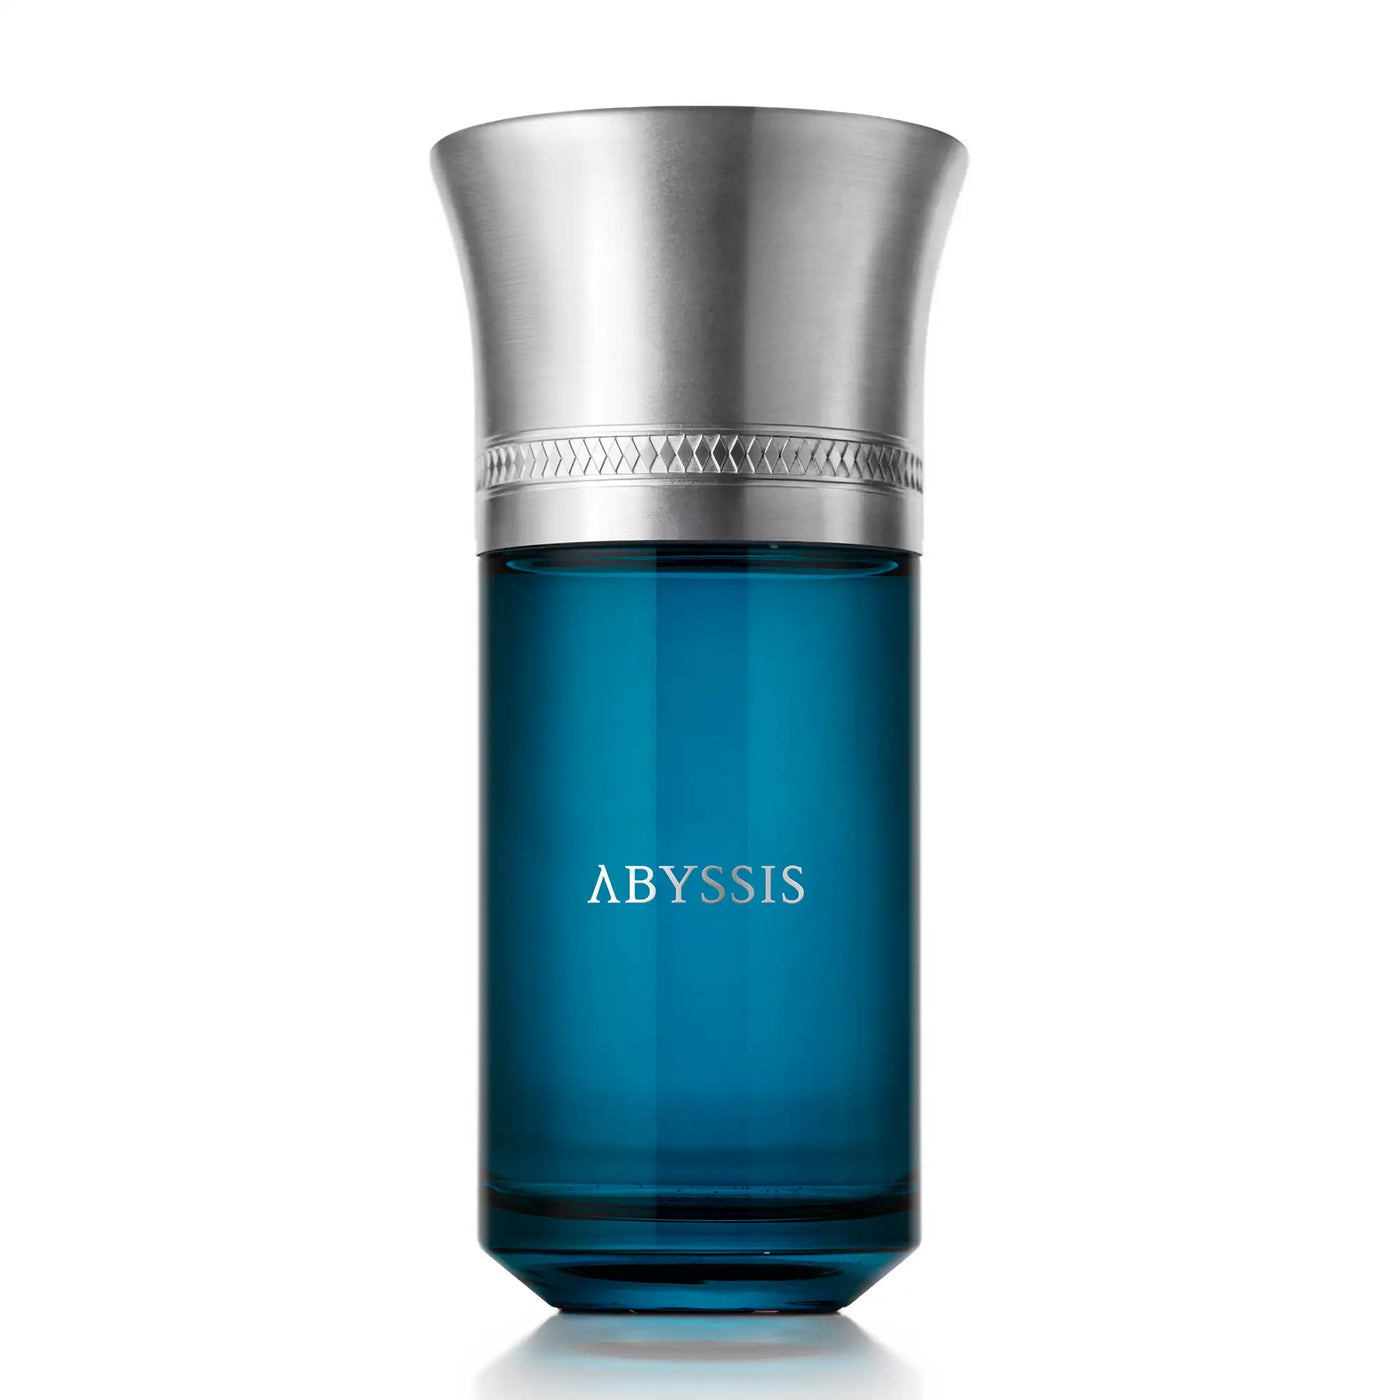 Liquides Imaginaires Abyssis - 100ml - Gharyal by Collectibles 